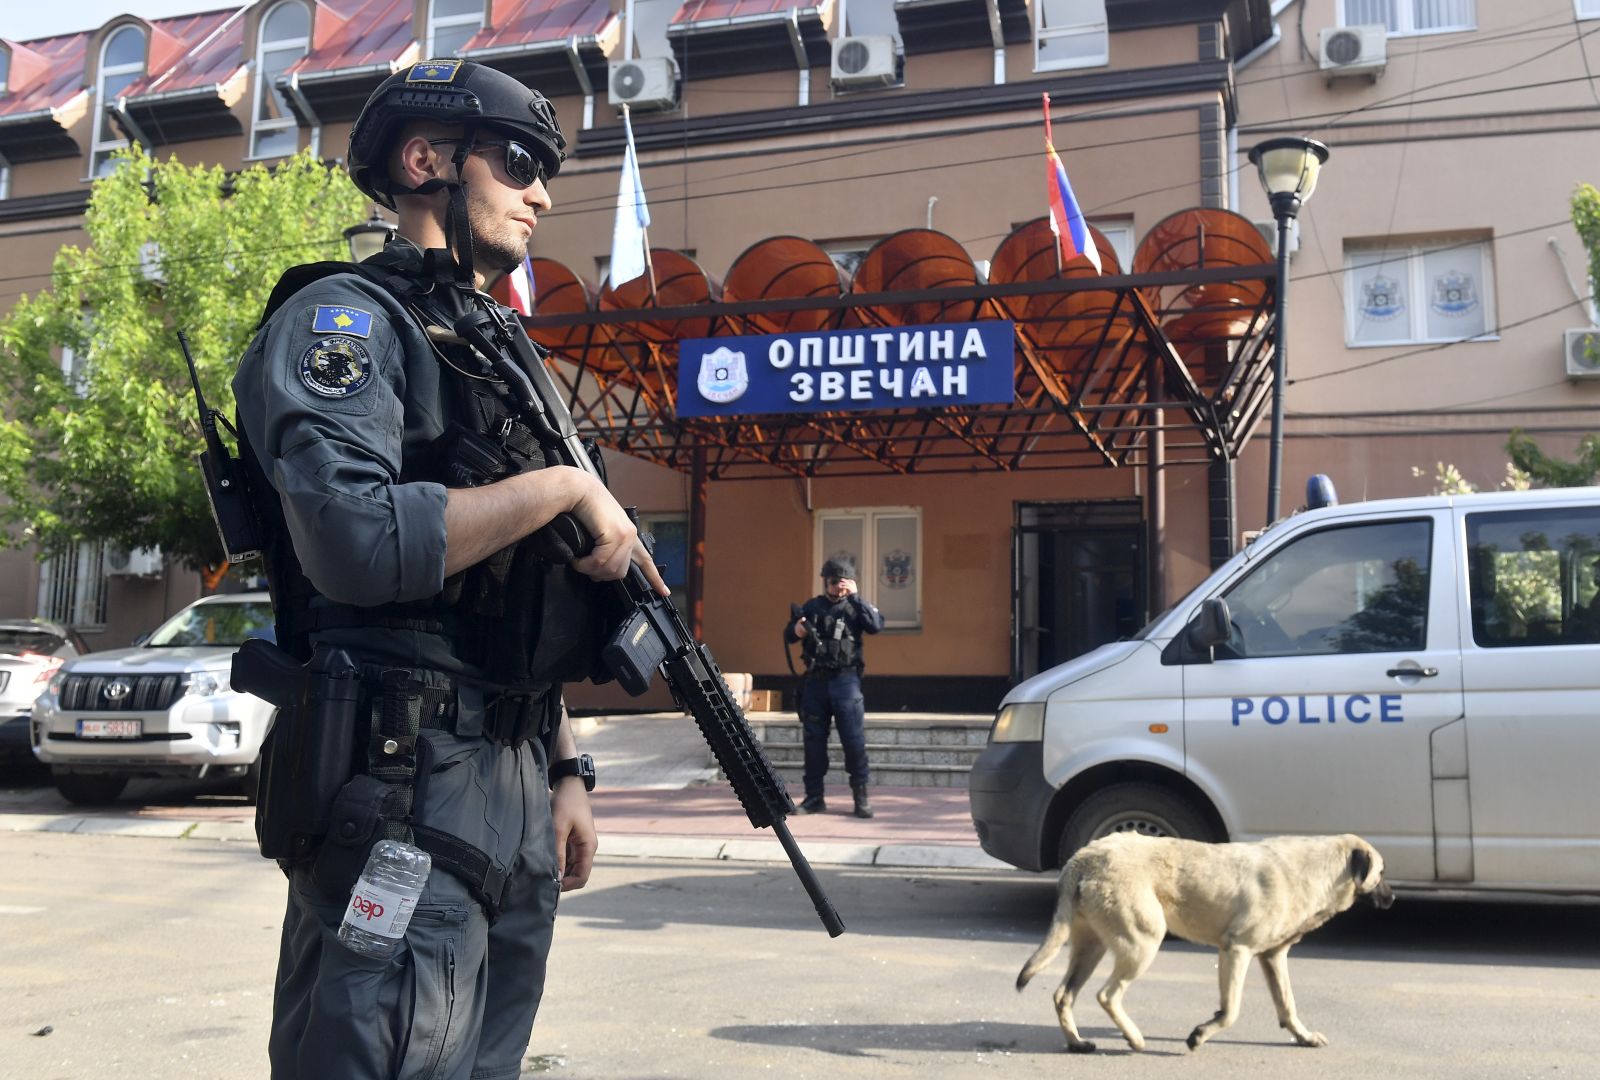 epa10656884 Kosovar police officers secure the municipal building in Zvecan, Kosovo, 27 May 2023. At least ten people were injured in violence between Kosovo police and Serbs in the town of Zvecan on 26 May, as protesters gathered outside state buildings while Albanian mayors were heading to assume office.  EPA/GEORGI LICOVSKI